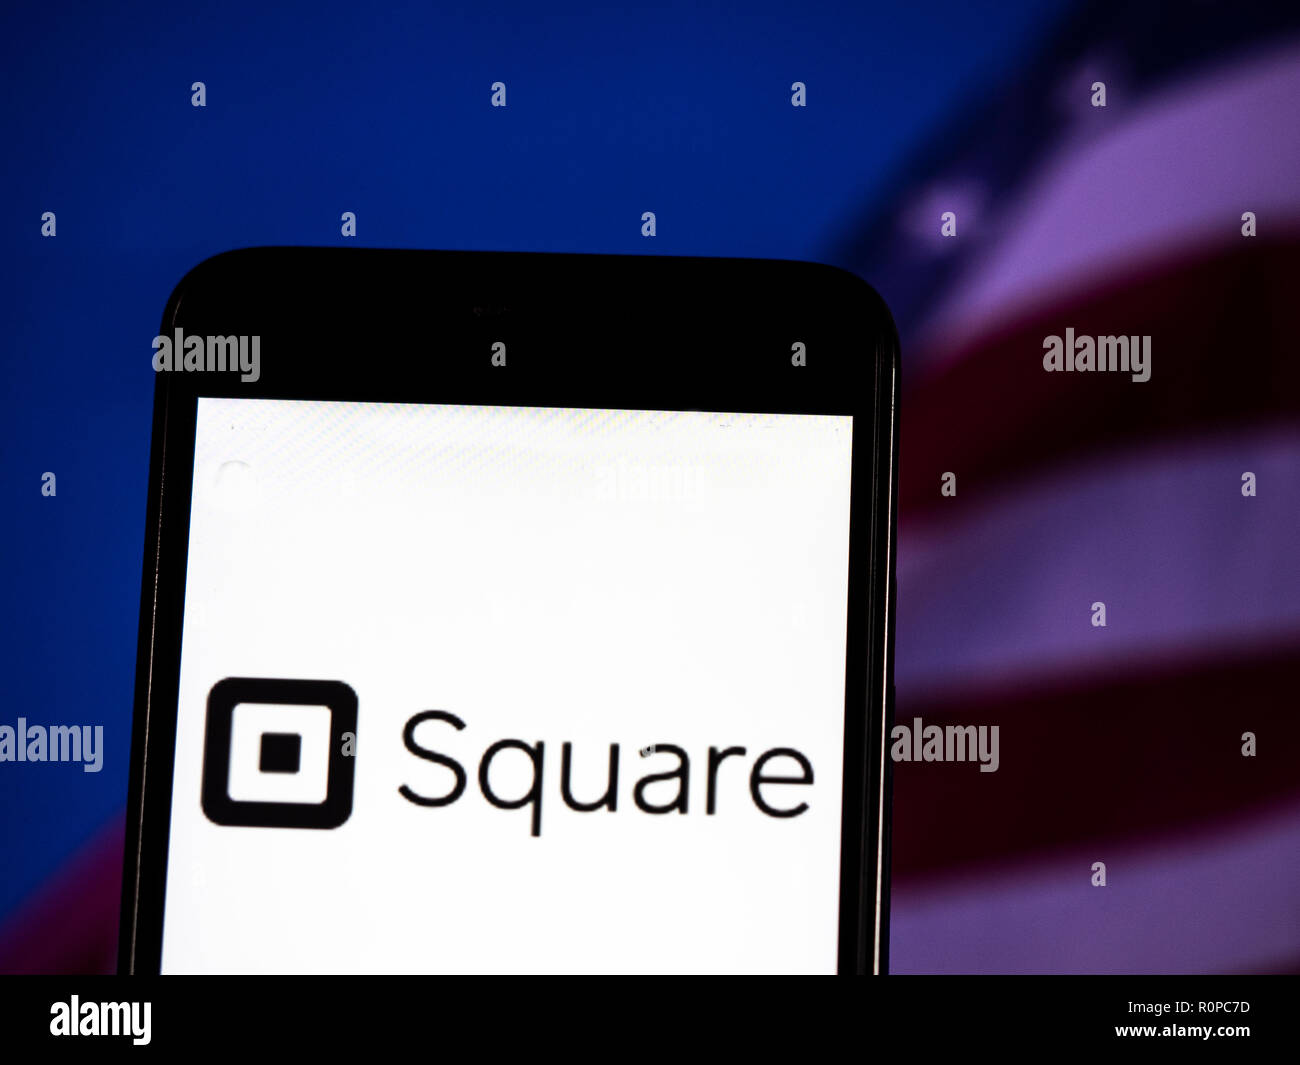 Square, Inc. logo seen displayed on smart phone. Square, Inc. is a financial services, merchant services aggregator, and mobile payment company. Stock Photo